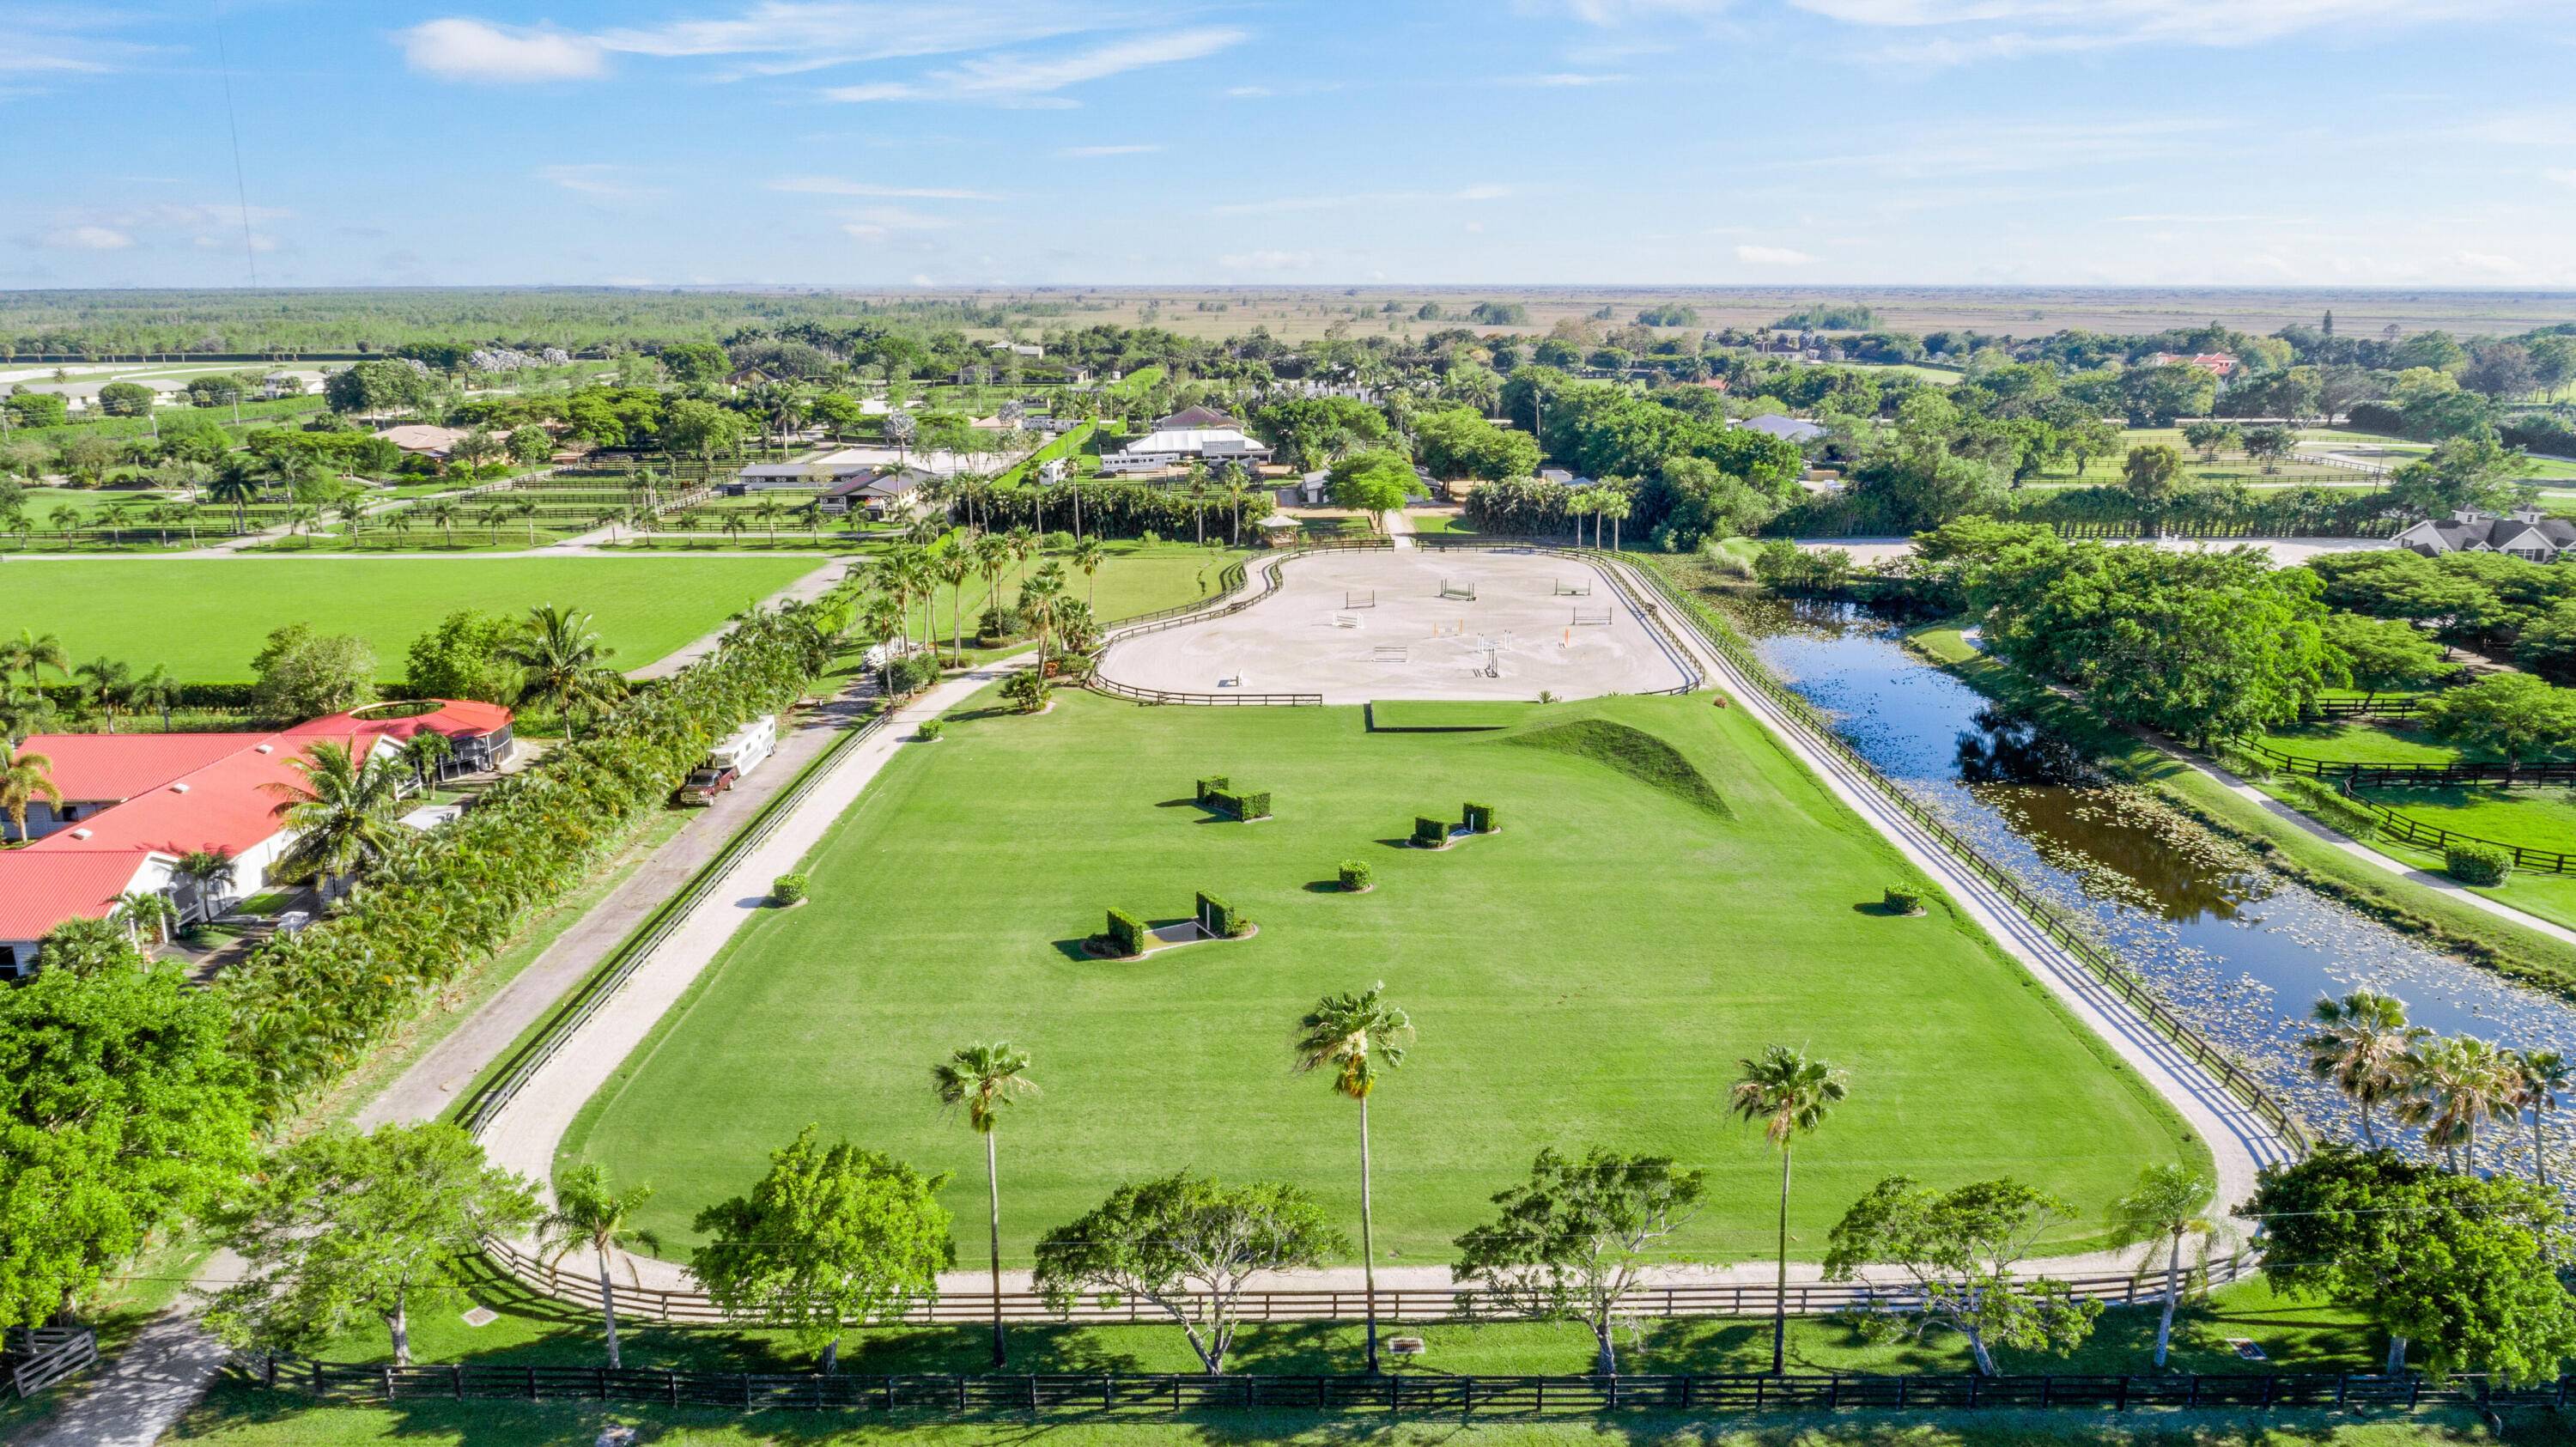 Equestrians dream farm on 10 AC 2 five acre lots with large all weather arena and spacious Grand Prix field with bank and water jump.